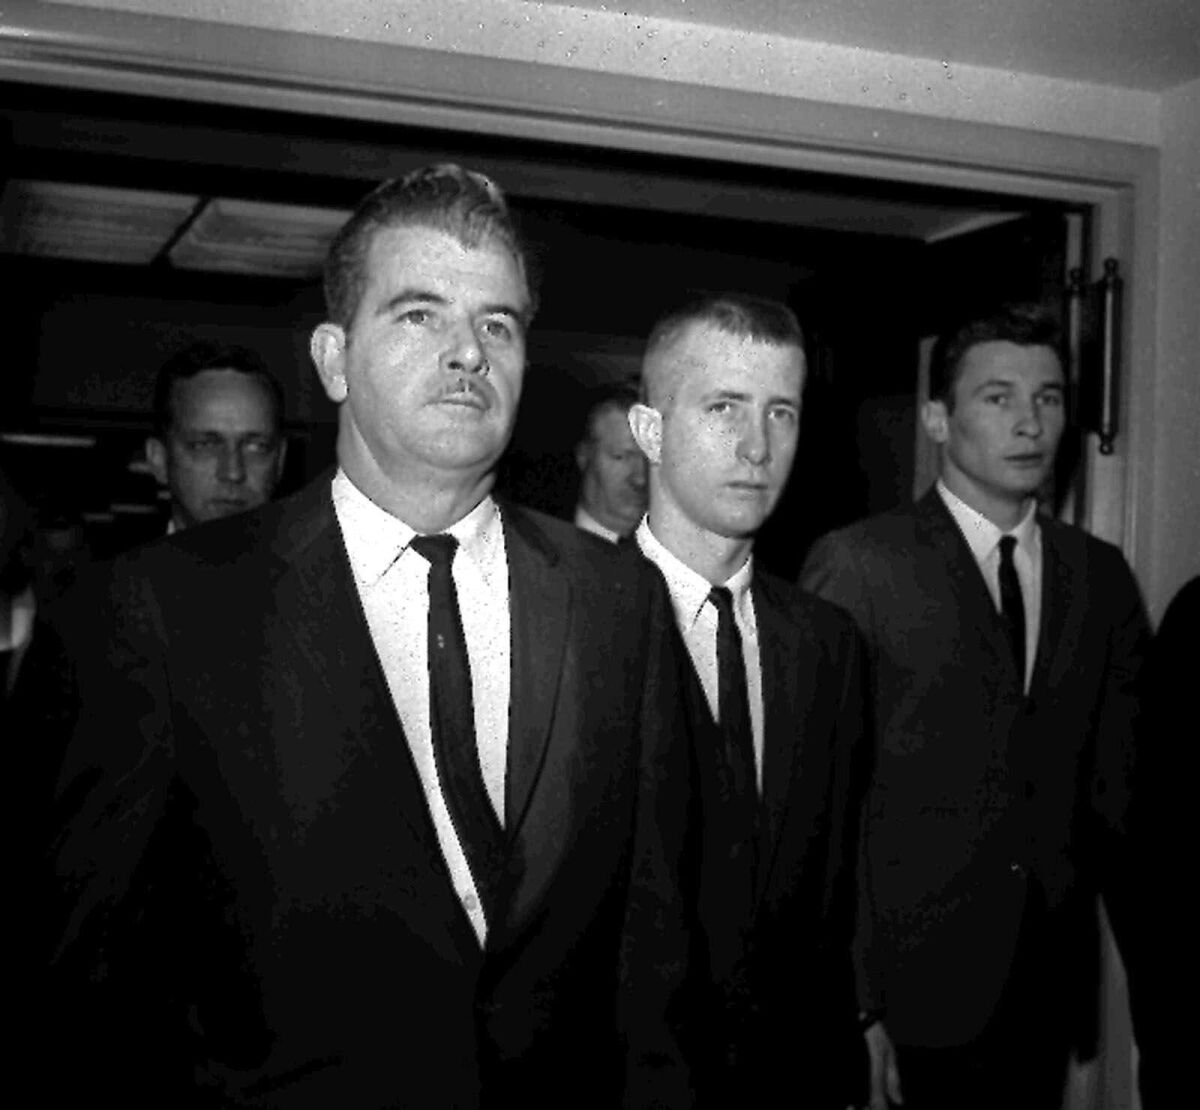 A black-and-white photo of three men in suits and ties